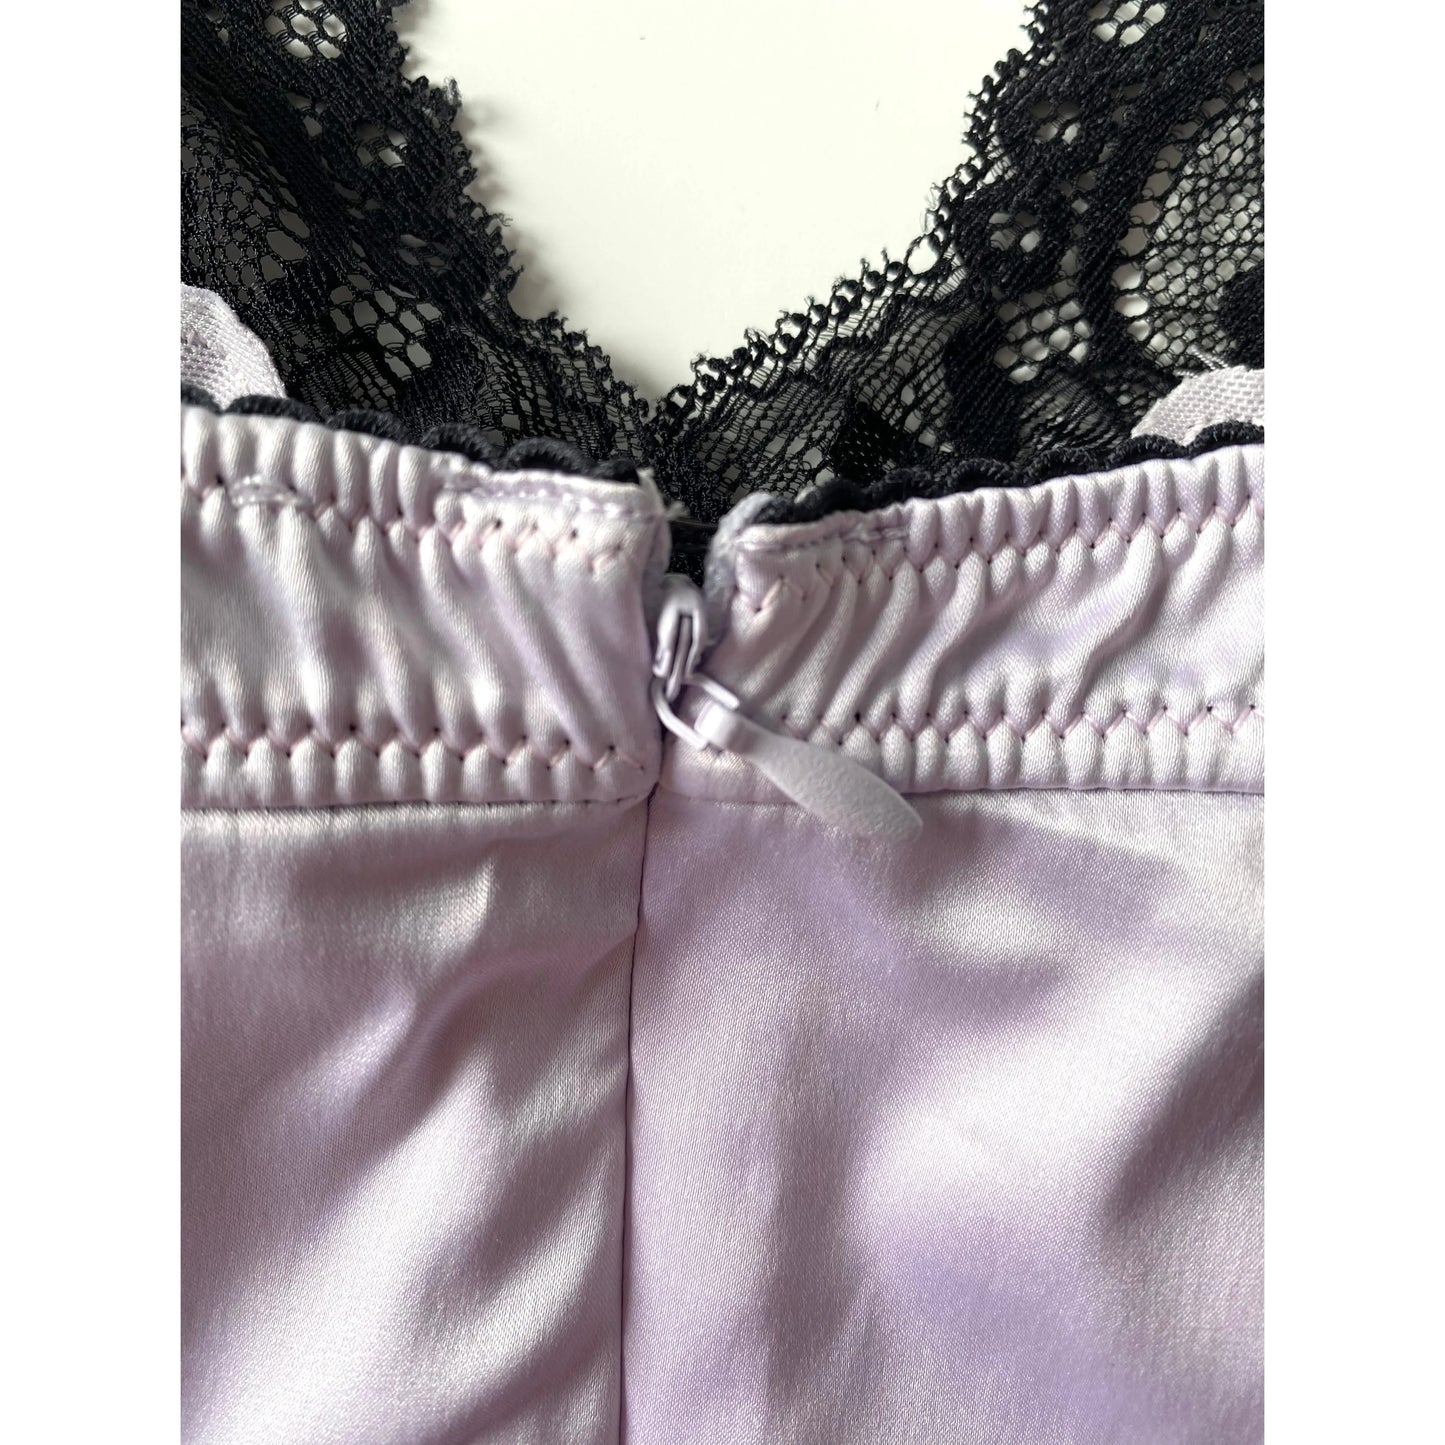 Dolce and Gabbana Violet Top (M)